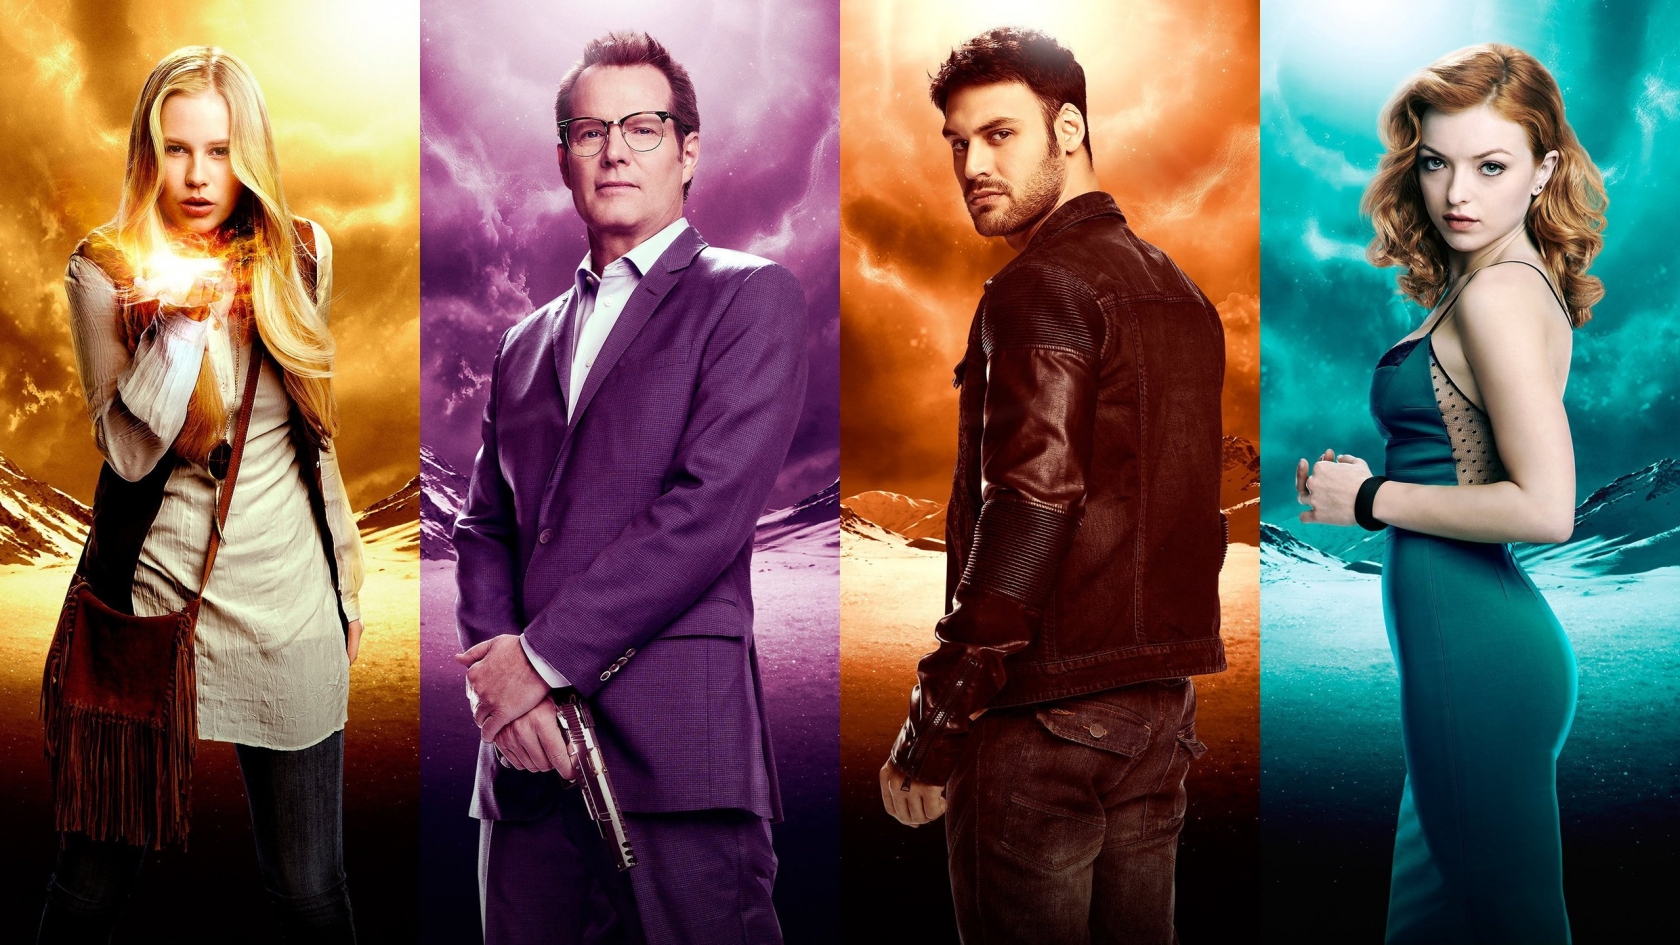 Heroes Reborn Cast for 1680 x 945 HDTV resolution